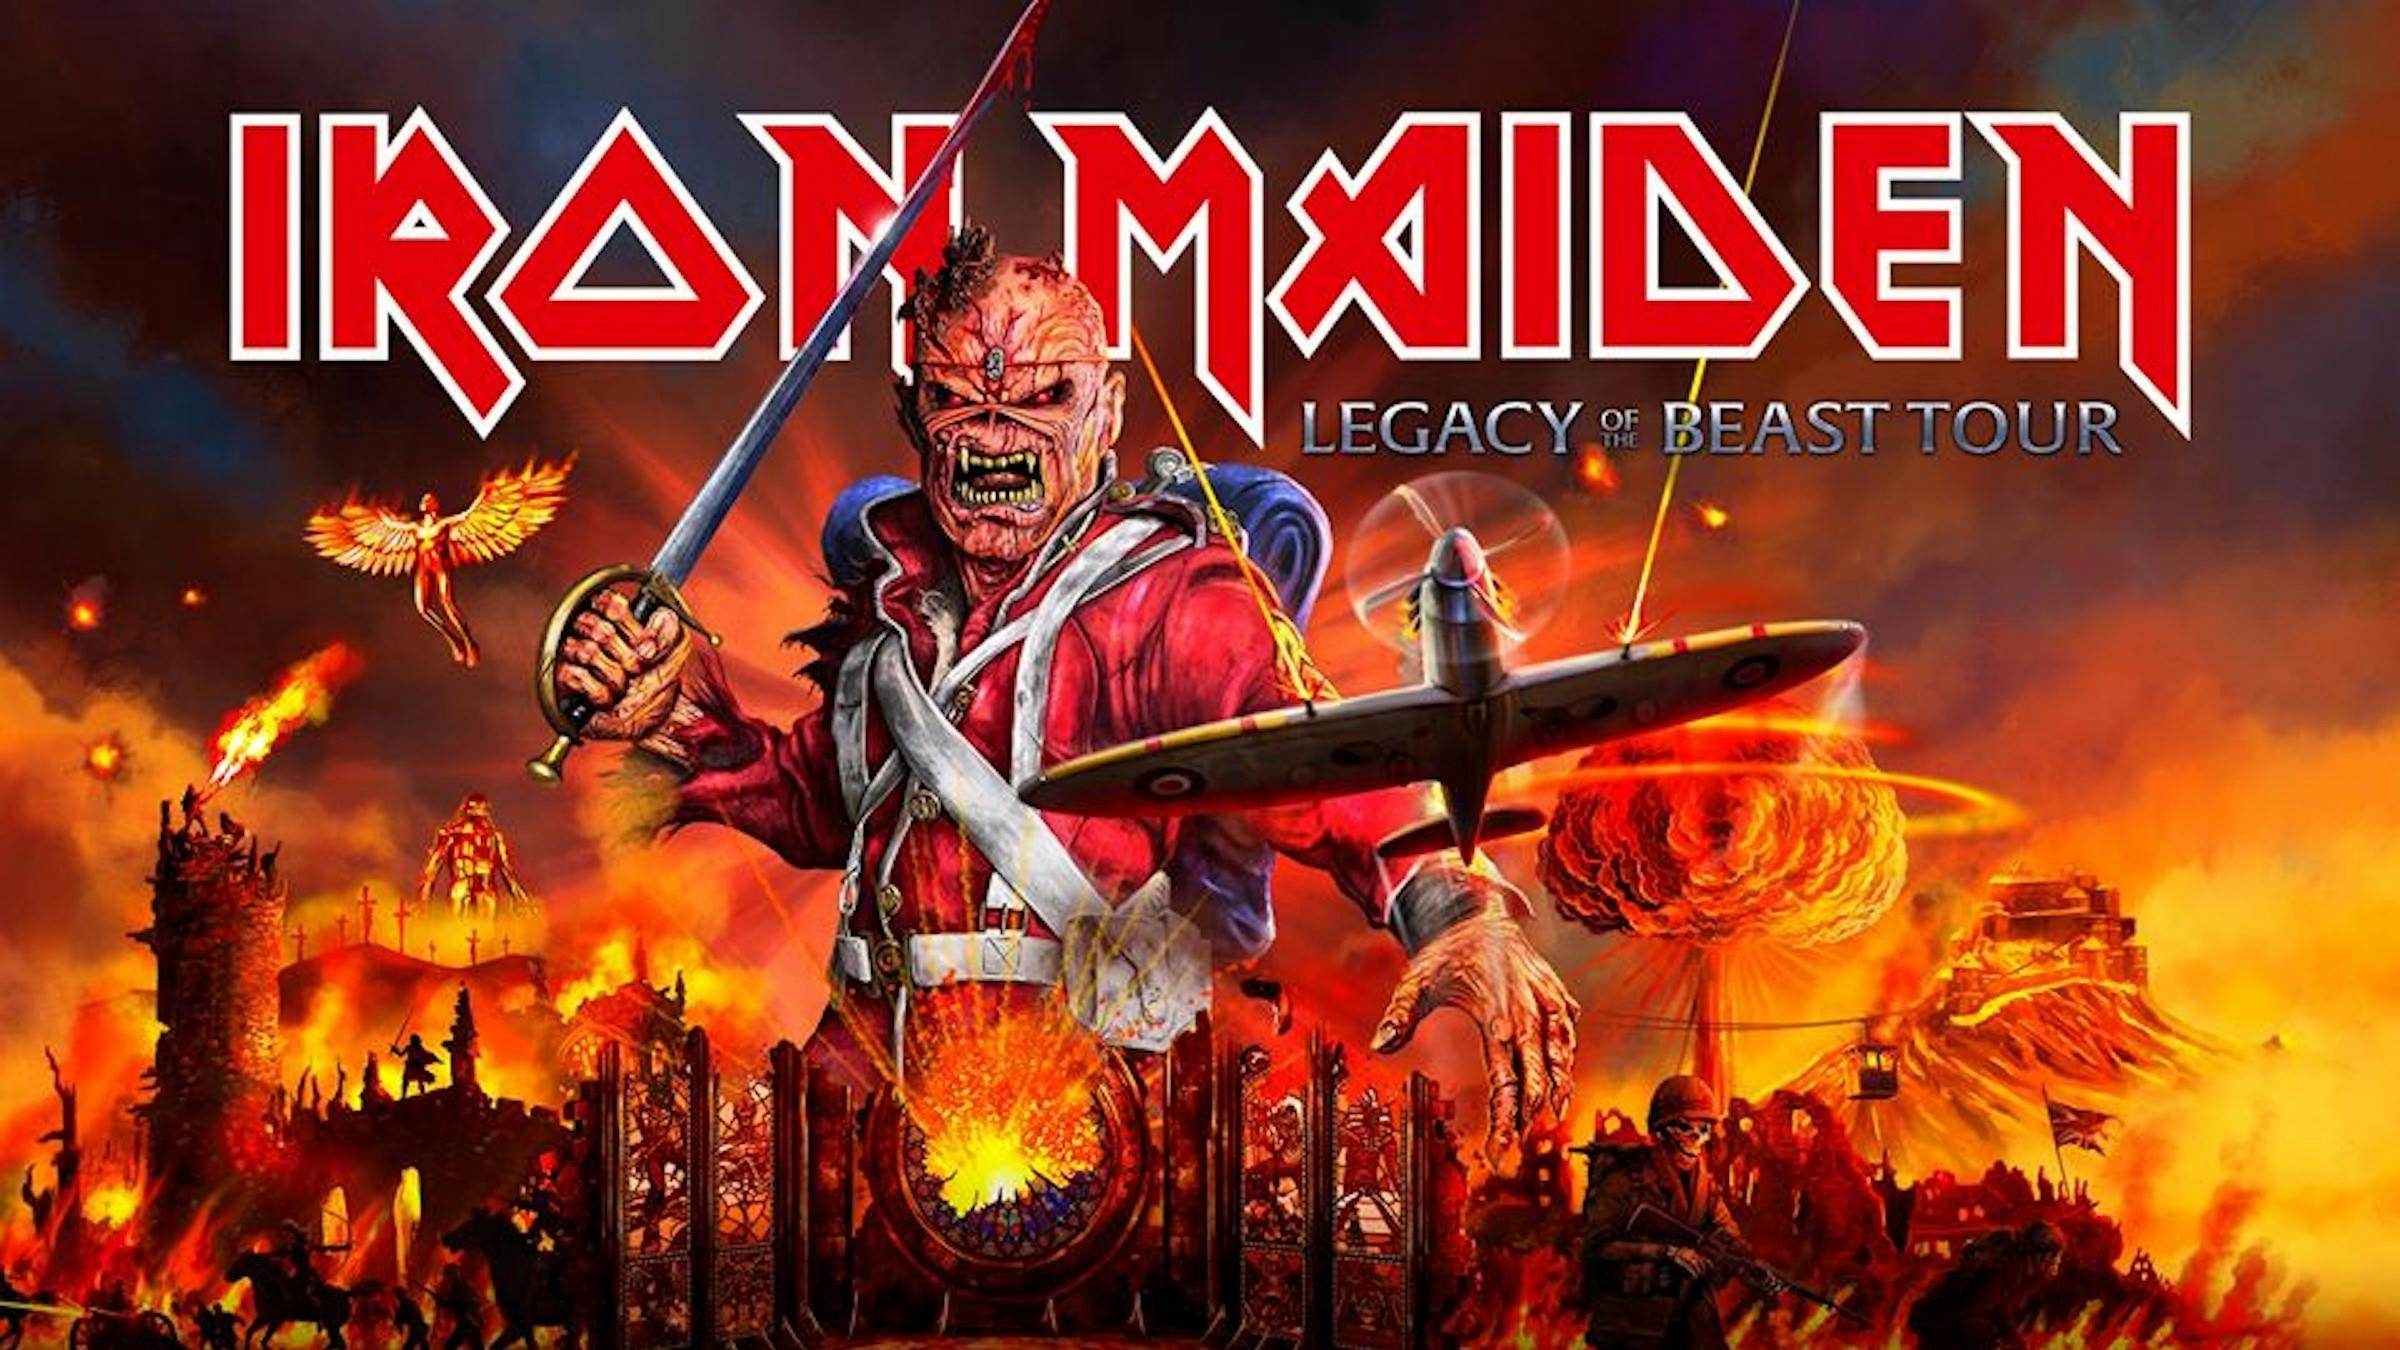 Iron Maiden Announce Australia and New Zealand Tour Dates With Killswitch Engage